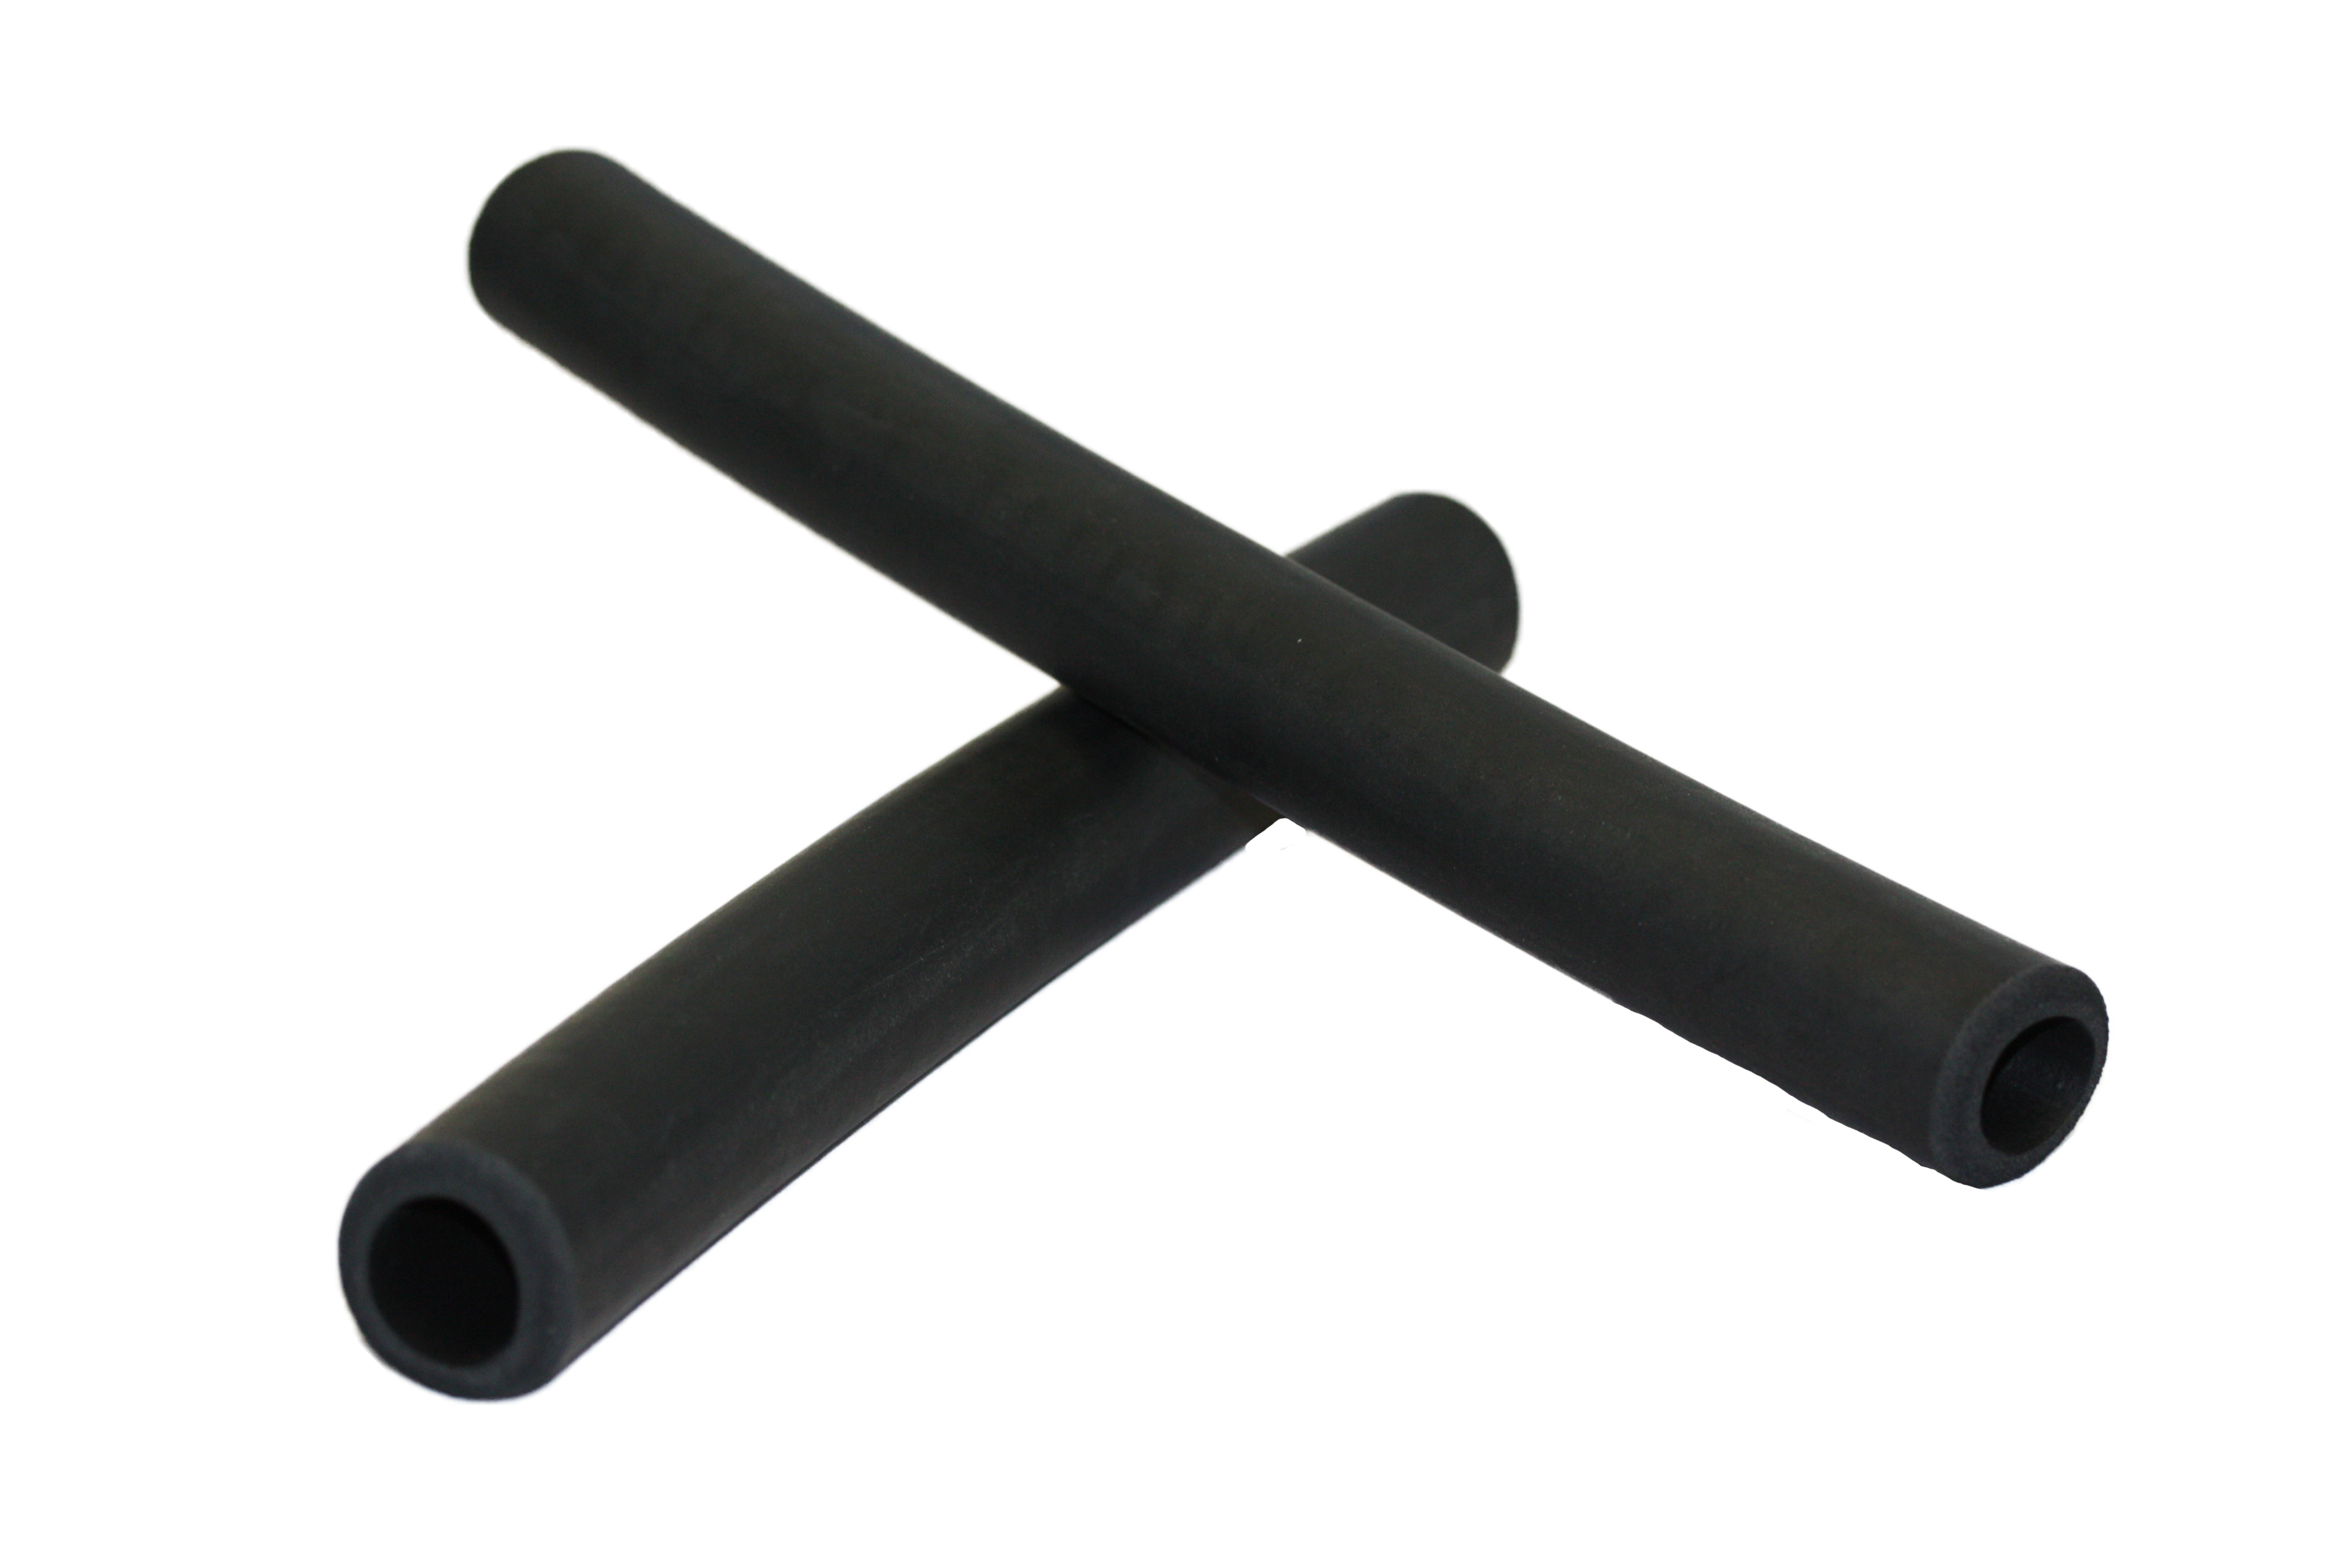 20mm ID 30mm OD 2m Length Tube Covers for Handle Grip Support Pipe Insulation Black MECCANIXITY Foam Tubing 